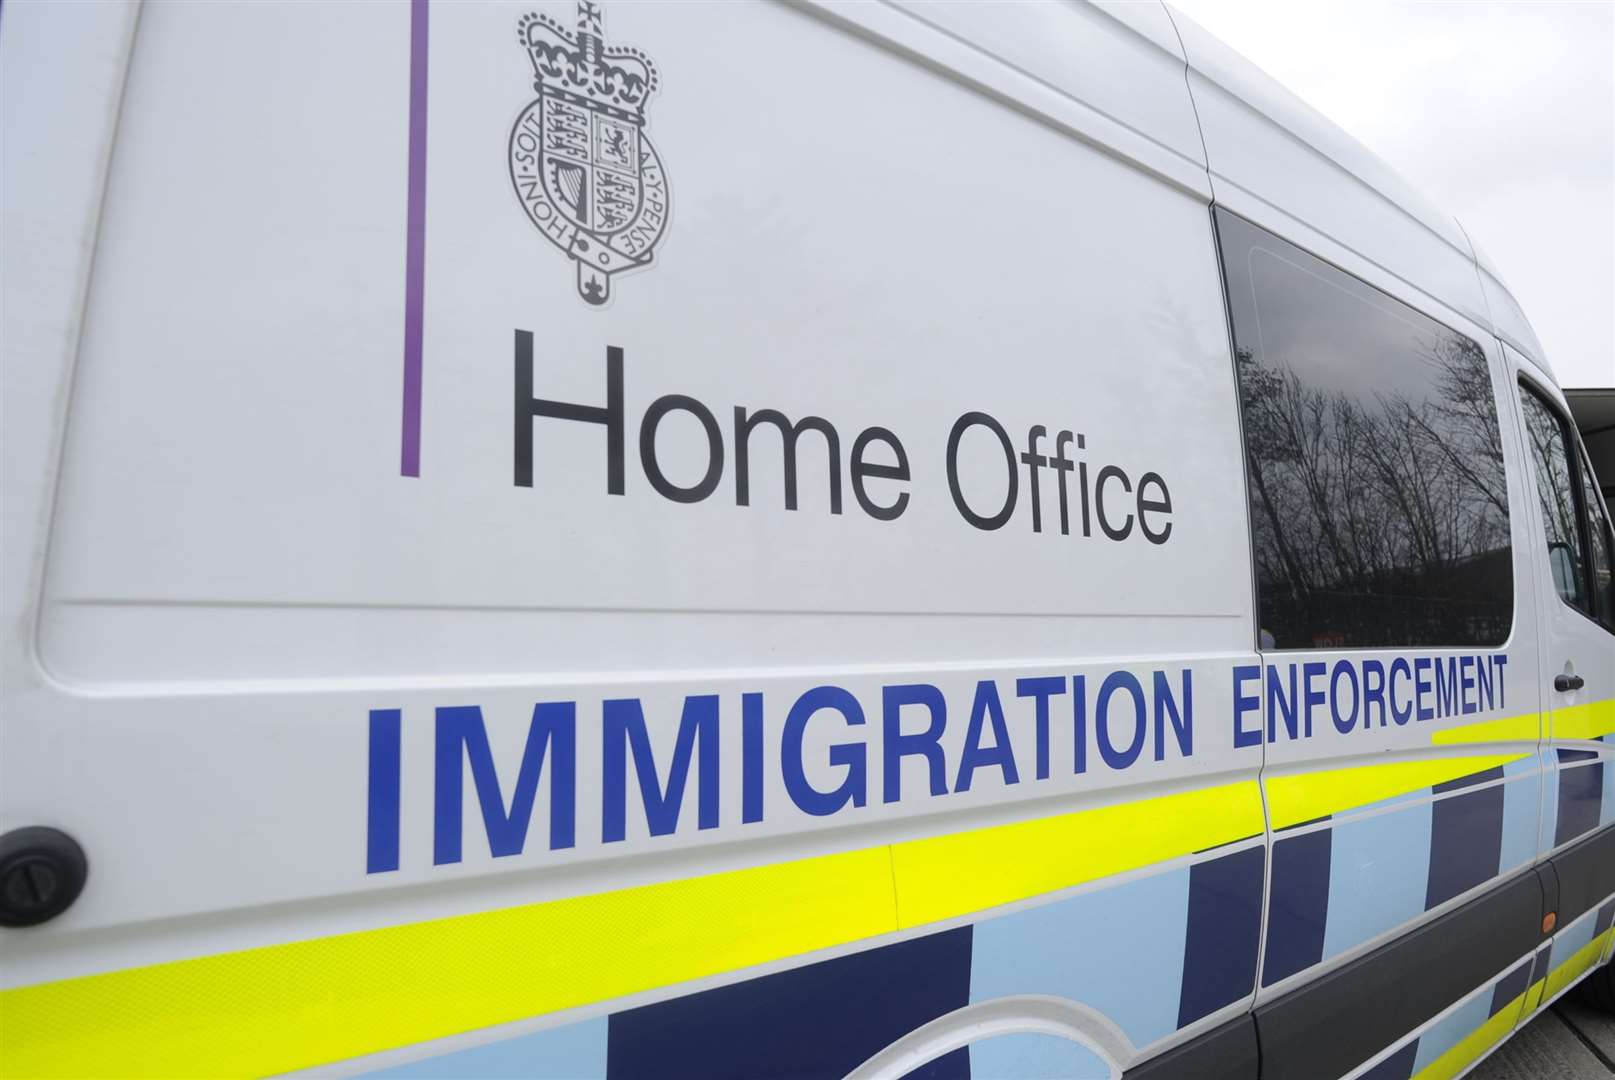 Six people were taken into custody by immigration officers